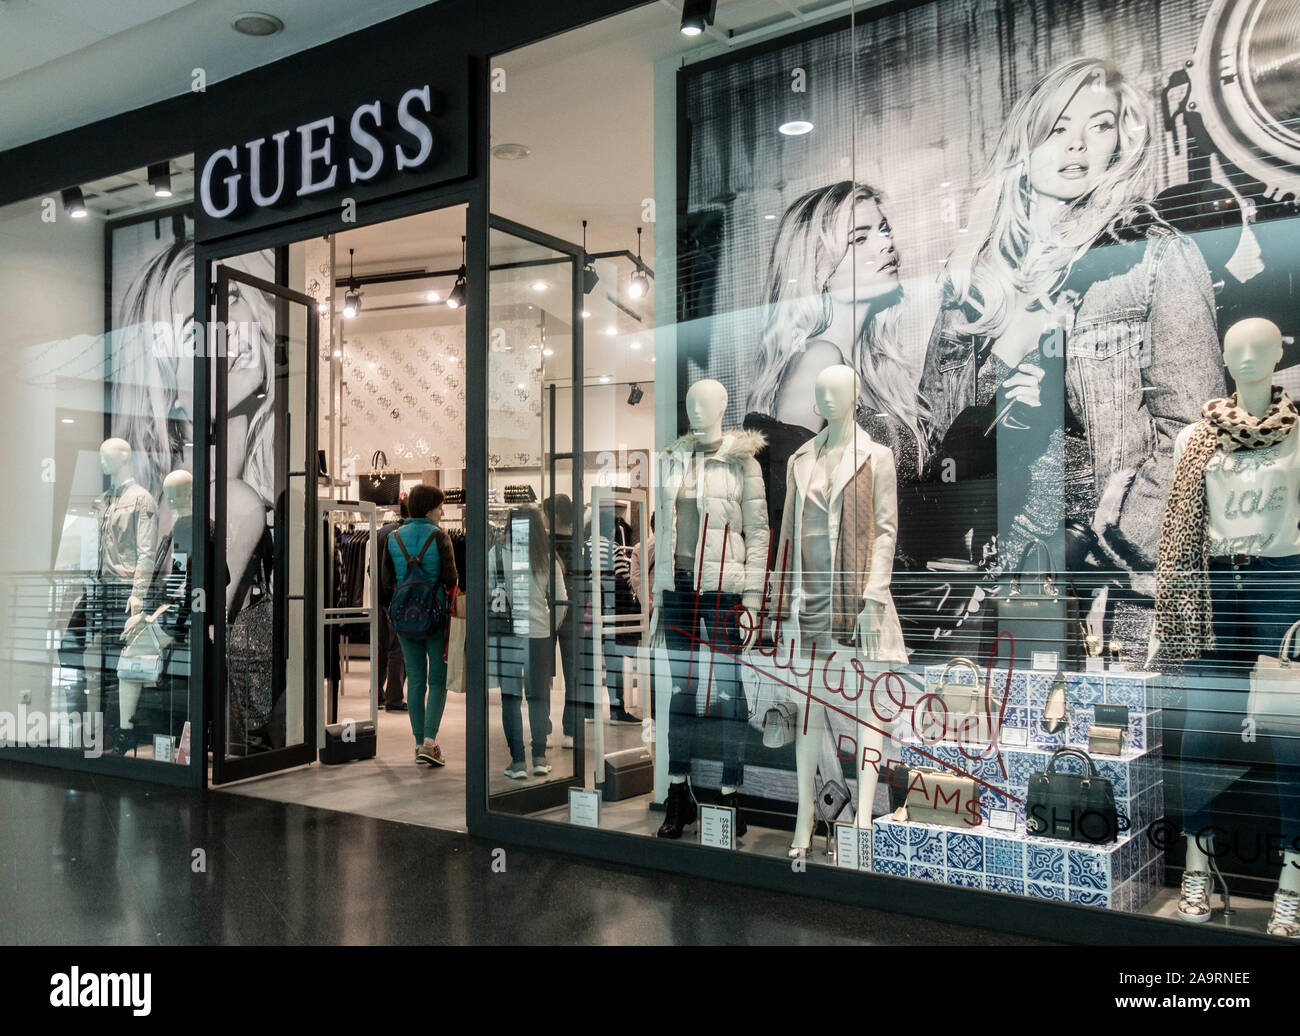 Guess clothing store in Spain Stock Photo